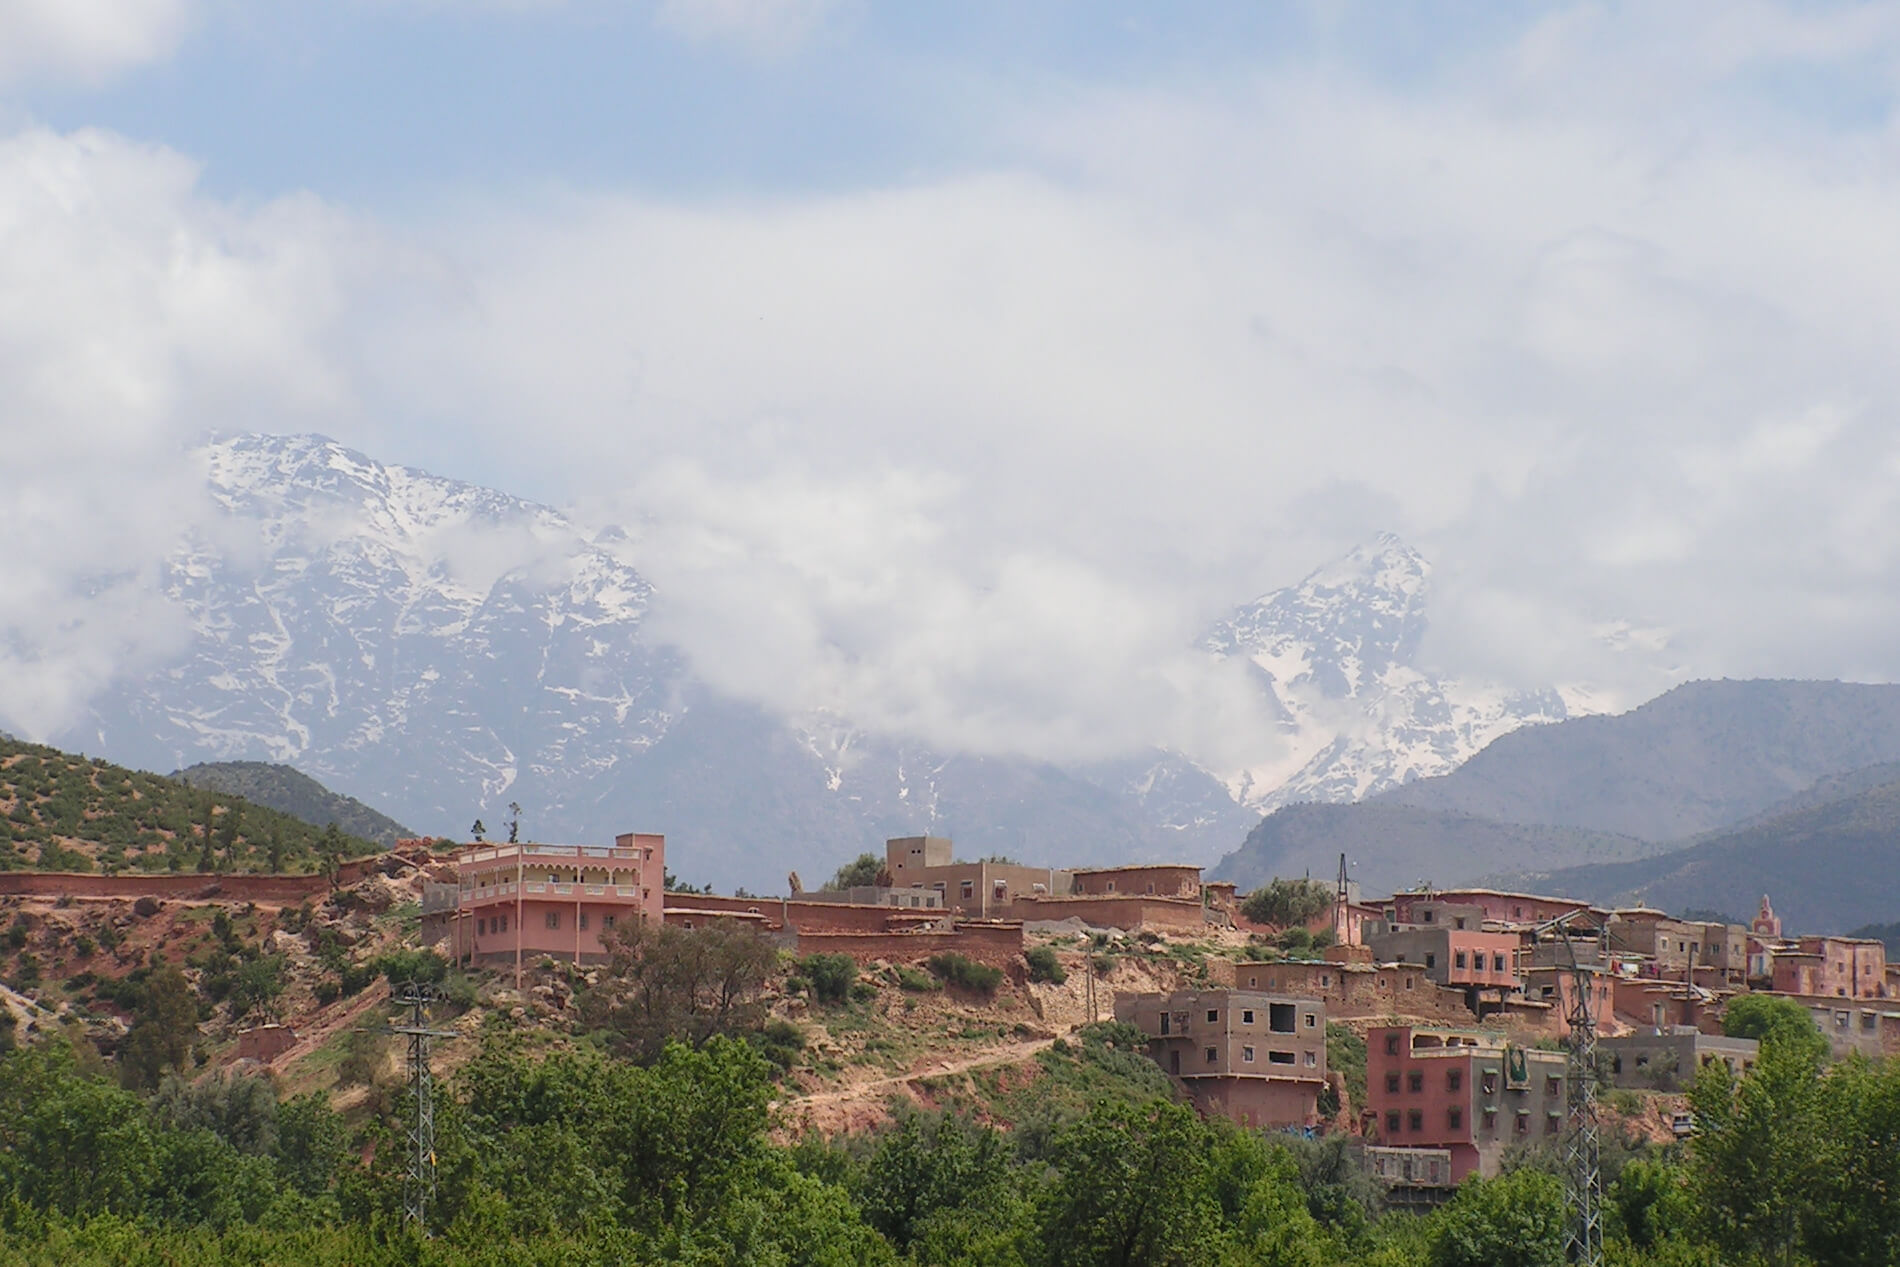 Marrakech Excurions, Cool day trip in the Atlas mountains from Marrakech